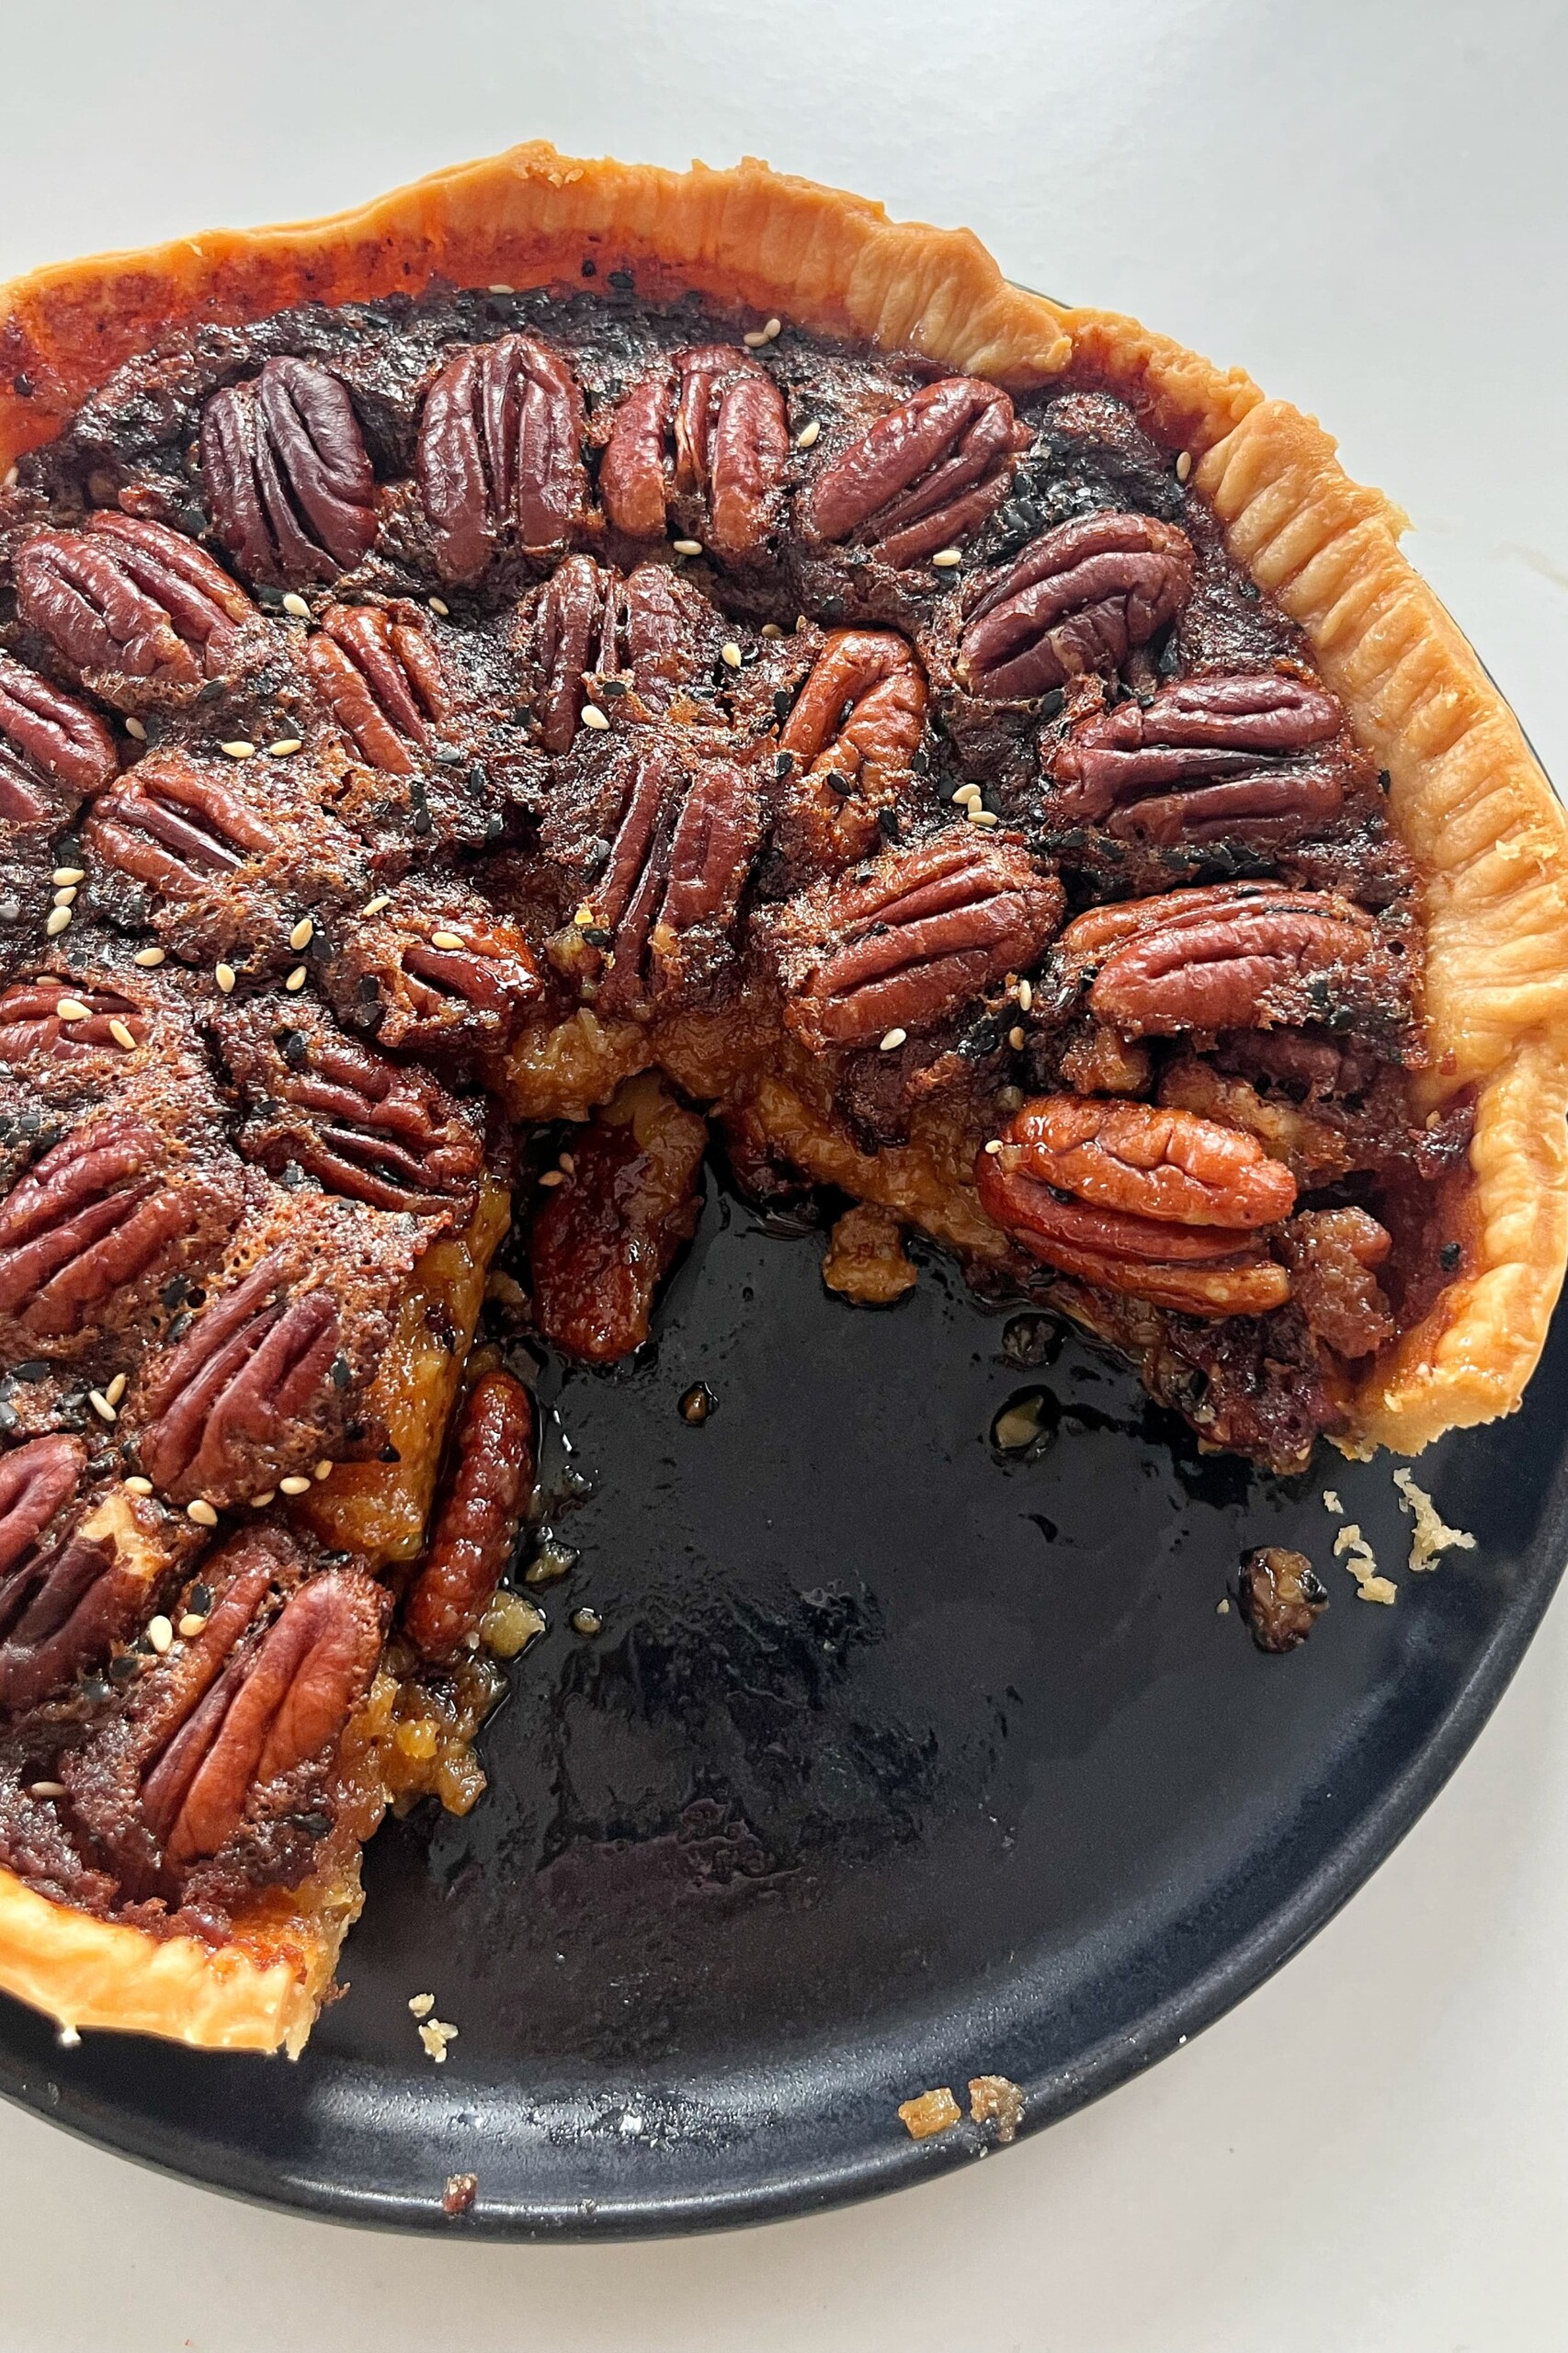 Miso pecan pie that has a slice cut out of it on a black plate.